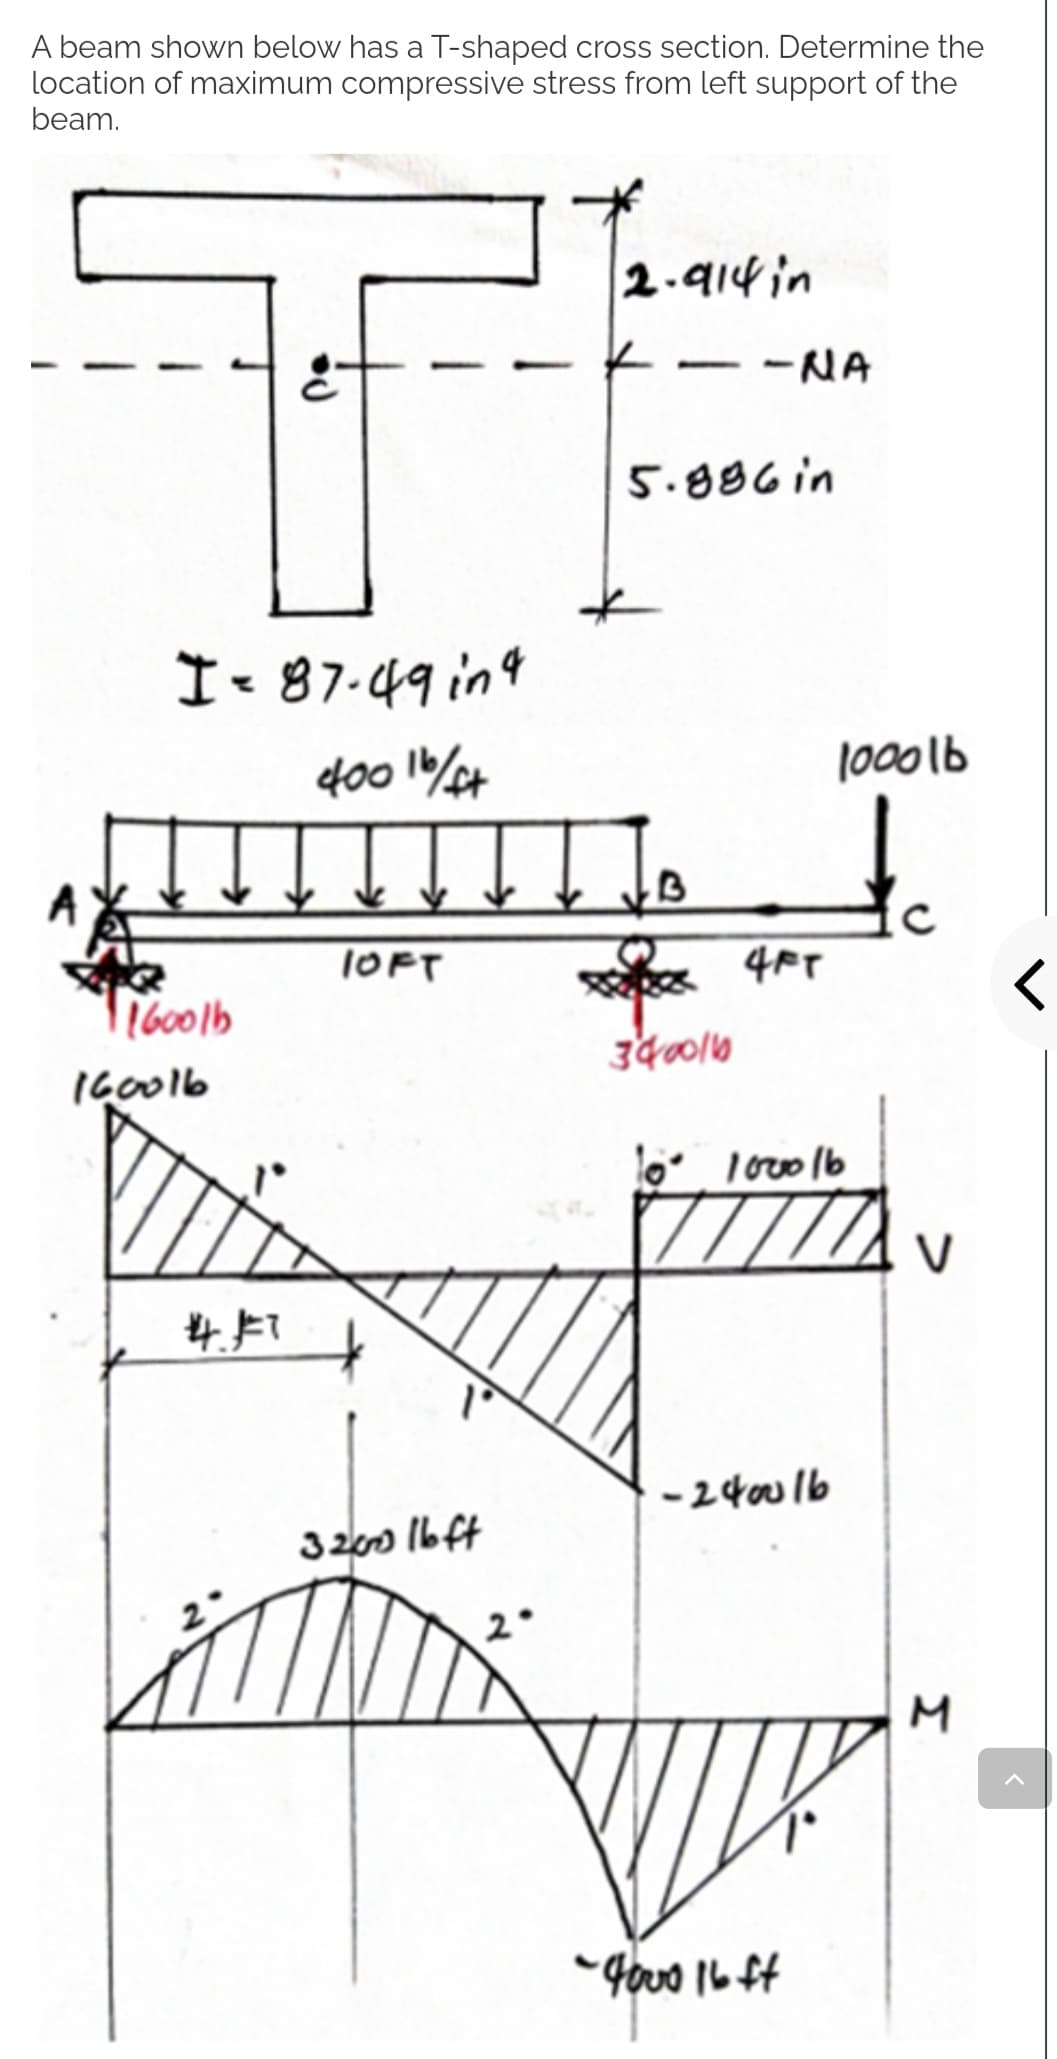 A beam shown below has a T-shaped cross section. Determine the
location of maximum compressive stress from left support of the
beam.
I = 87-49 in 4
400 16/ft
16001b
160016
I↓↓↓I
LOFT
#. £7
32000 lbft
2.914 in
5.886 in
B
-NA
34/00/6
4FT
10° 100016
-240016
1000lb
dc
-4000 16 ff
V
M